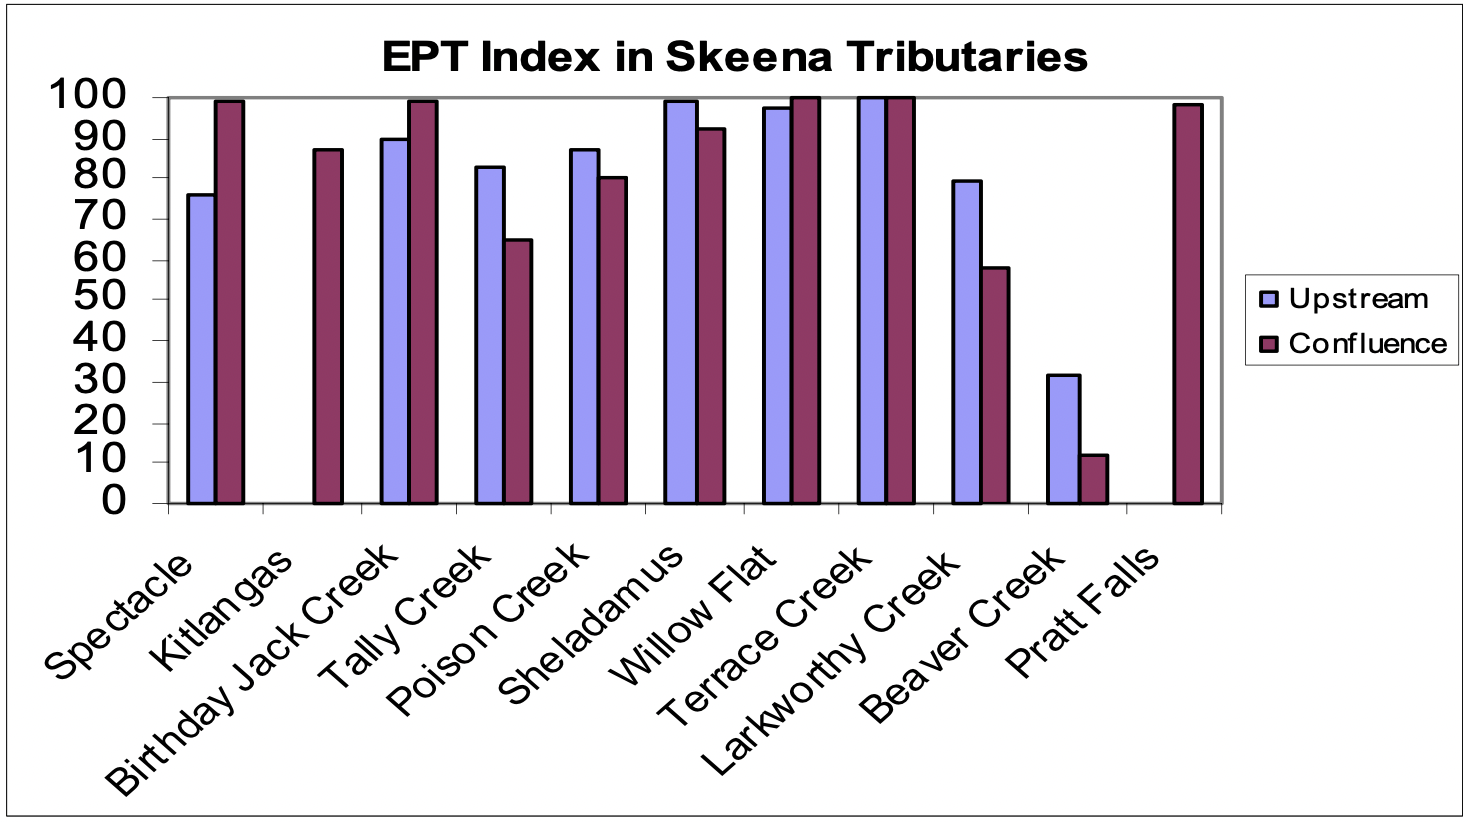 Figure 6. Comparison of EPT Index between upstream and confluence reaches of 11 Skeena Tributaries.